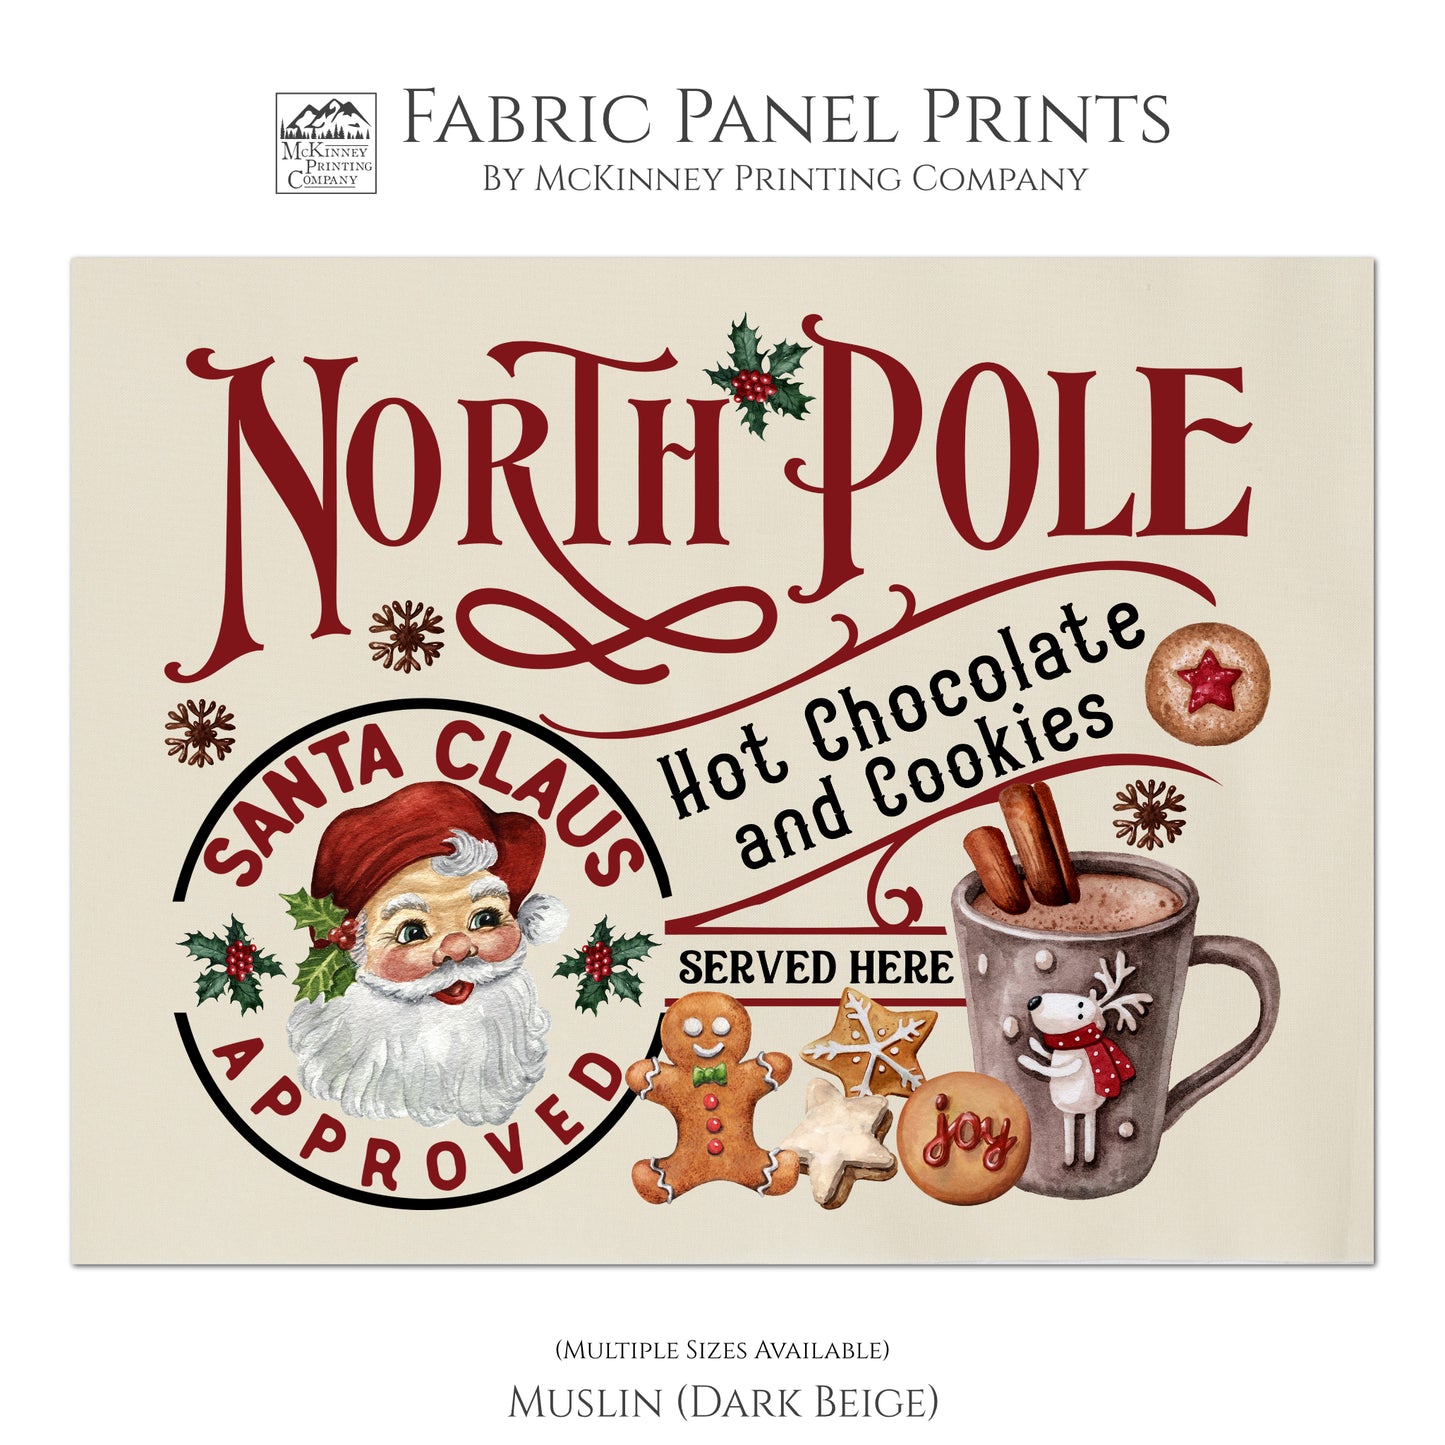 Christmas Fabric Panels, North Pole, Santa Claus, Hot Chocolate and Cookies, Fabric Panel Print, Wall Art, Quilt - Muslin